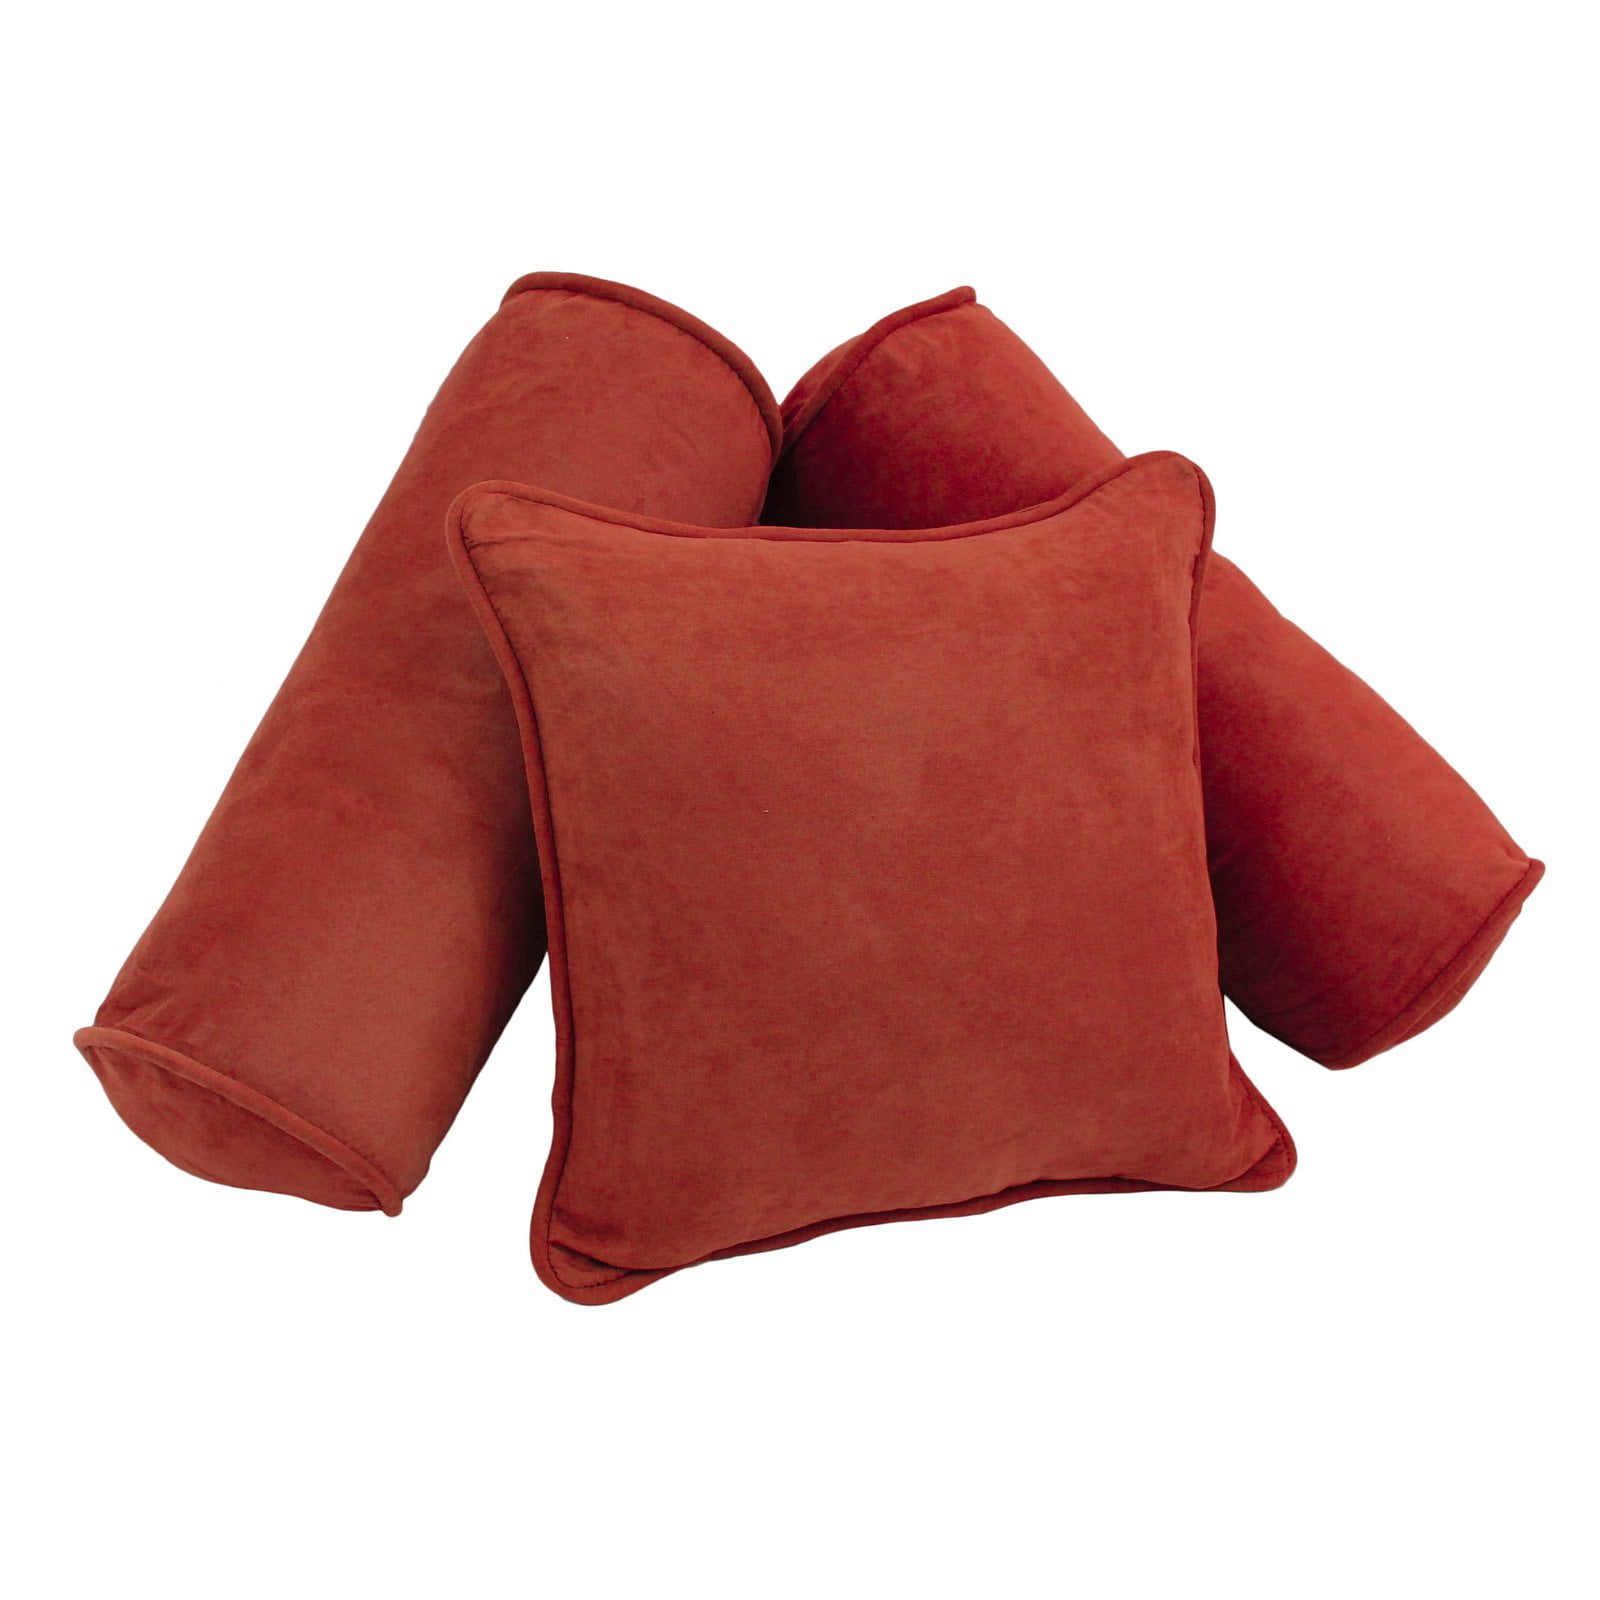 9816-CD-S3-MS-CR Double-Corded Solid Microsuede Throw Pillows with Inserts, Cardinal Red - Set of 3 -  Blazing Needles